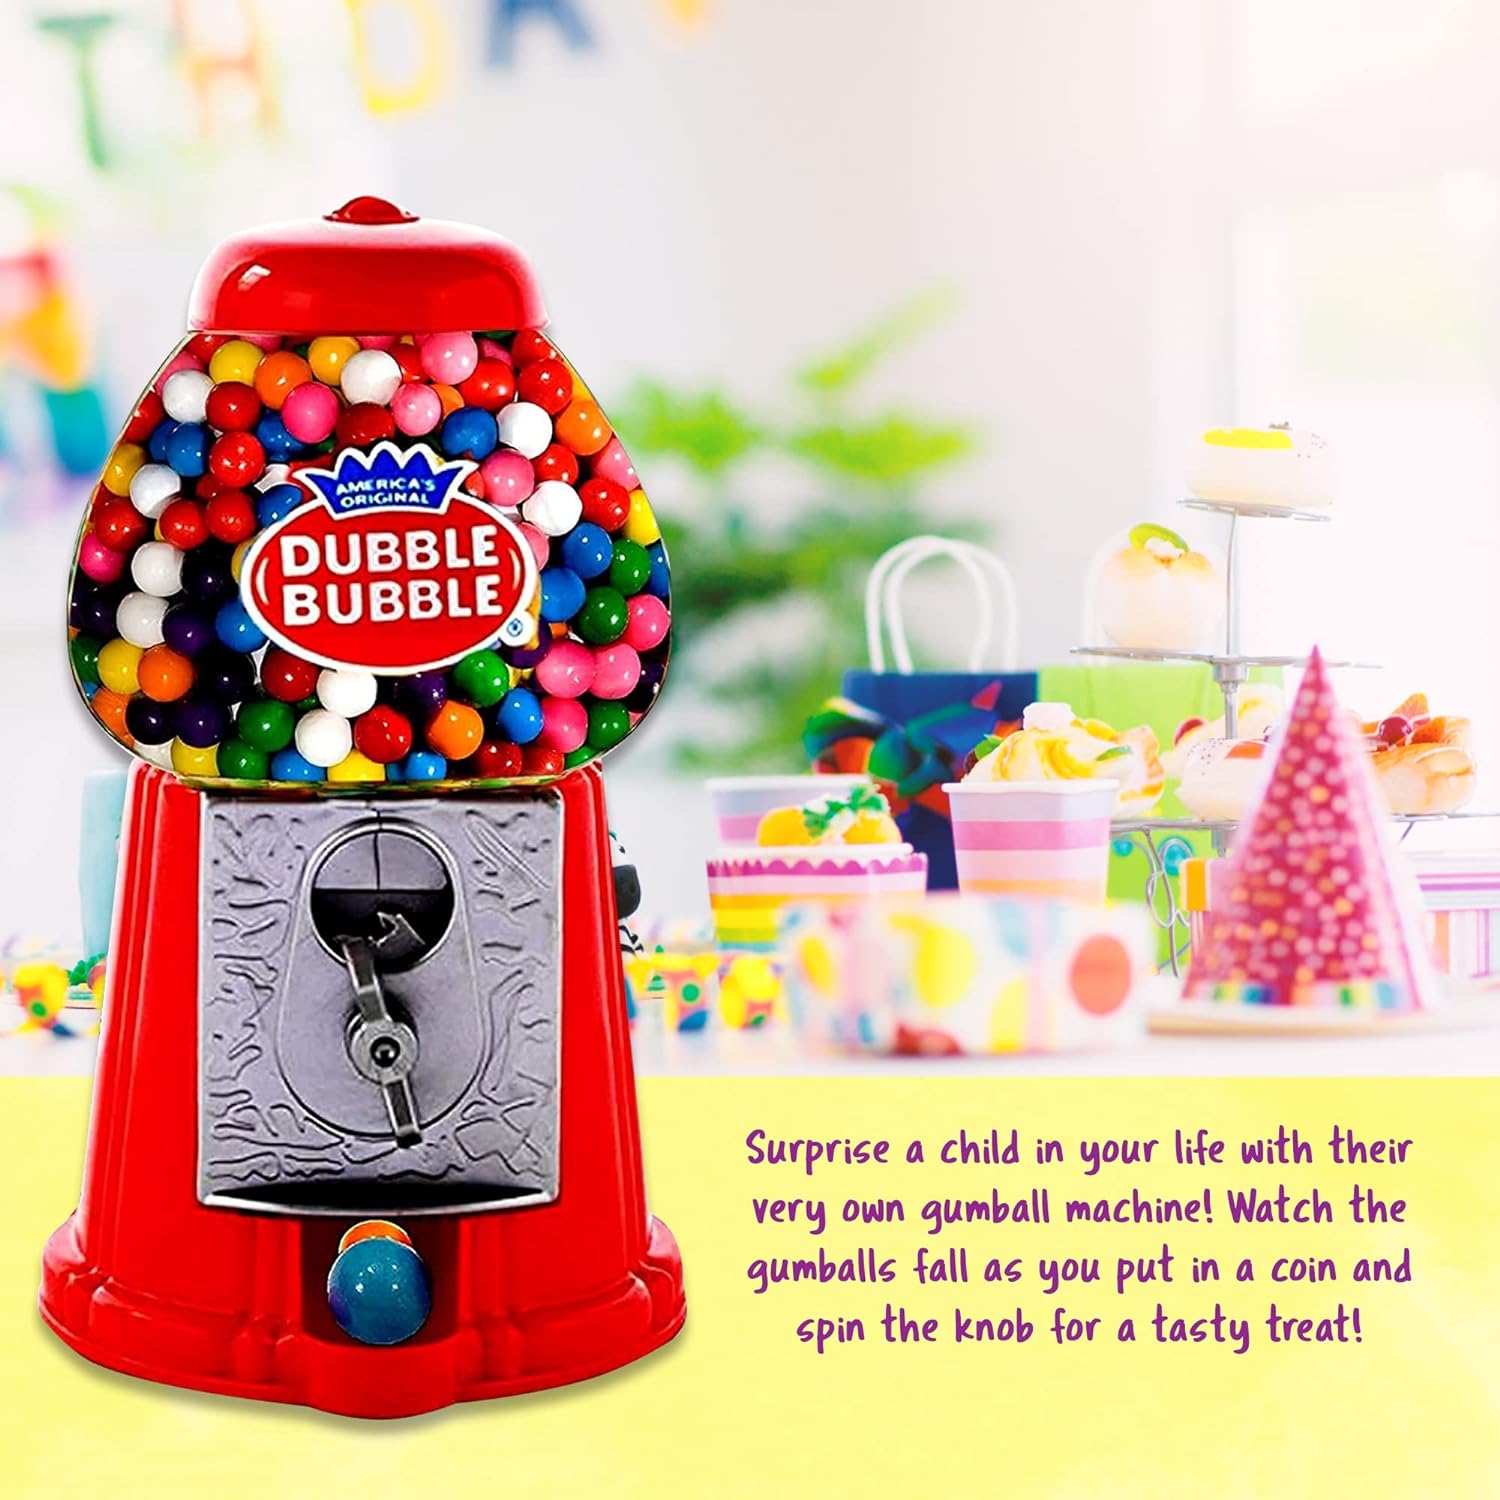 Gumball Machine for Kids 8.5" - Coin Operated Toy Bank - Dubble Bubble Red Gum Machine Classic Red Style Includes 45 Gum Balls - Kids Coin Bank - Candy Dispenser - Playo